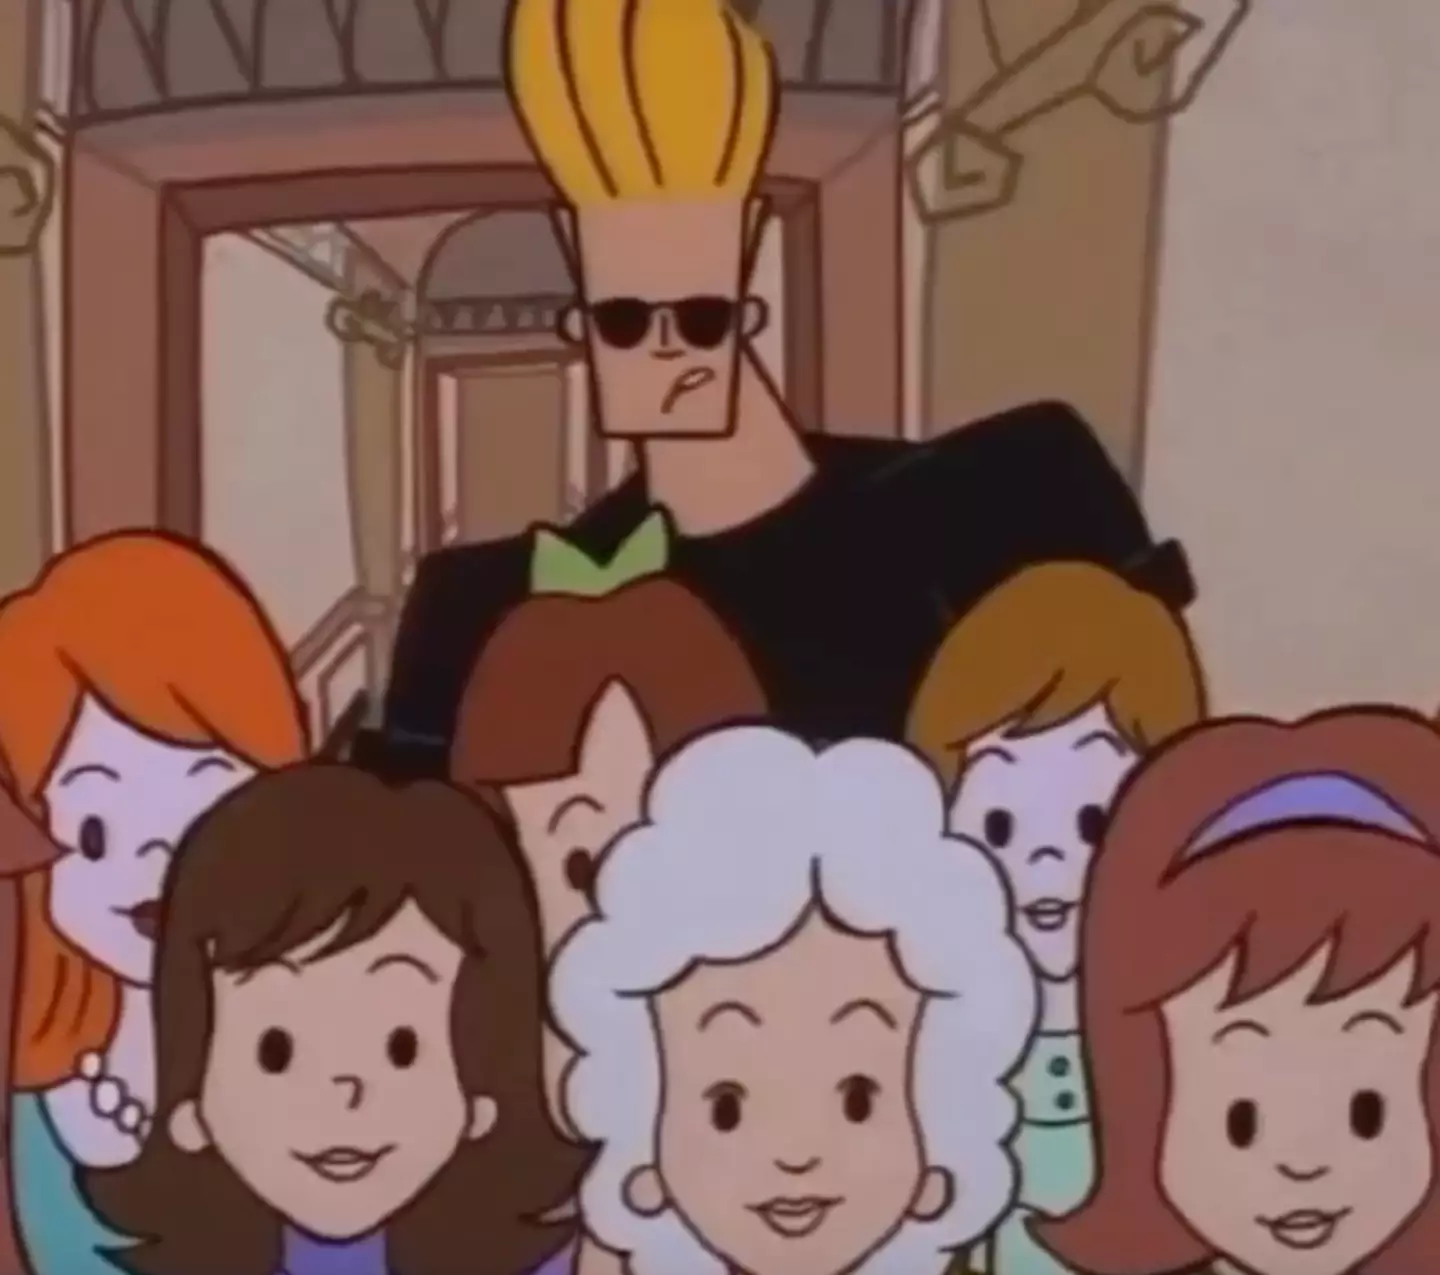 Fans have claimed Johnny Bravo would be 'canceled' now.